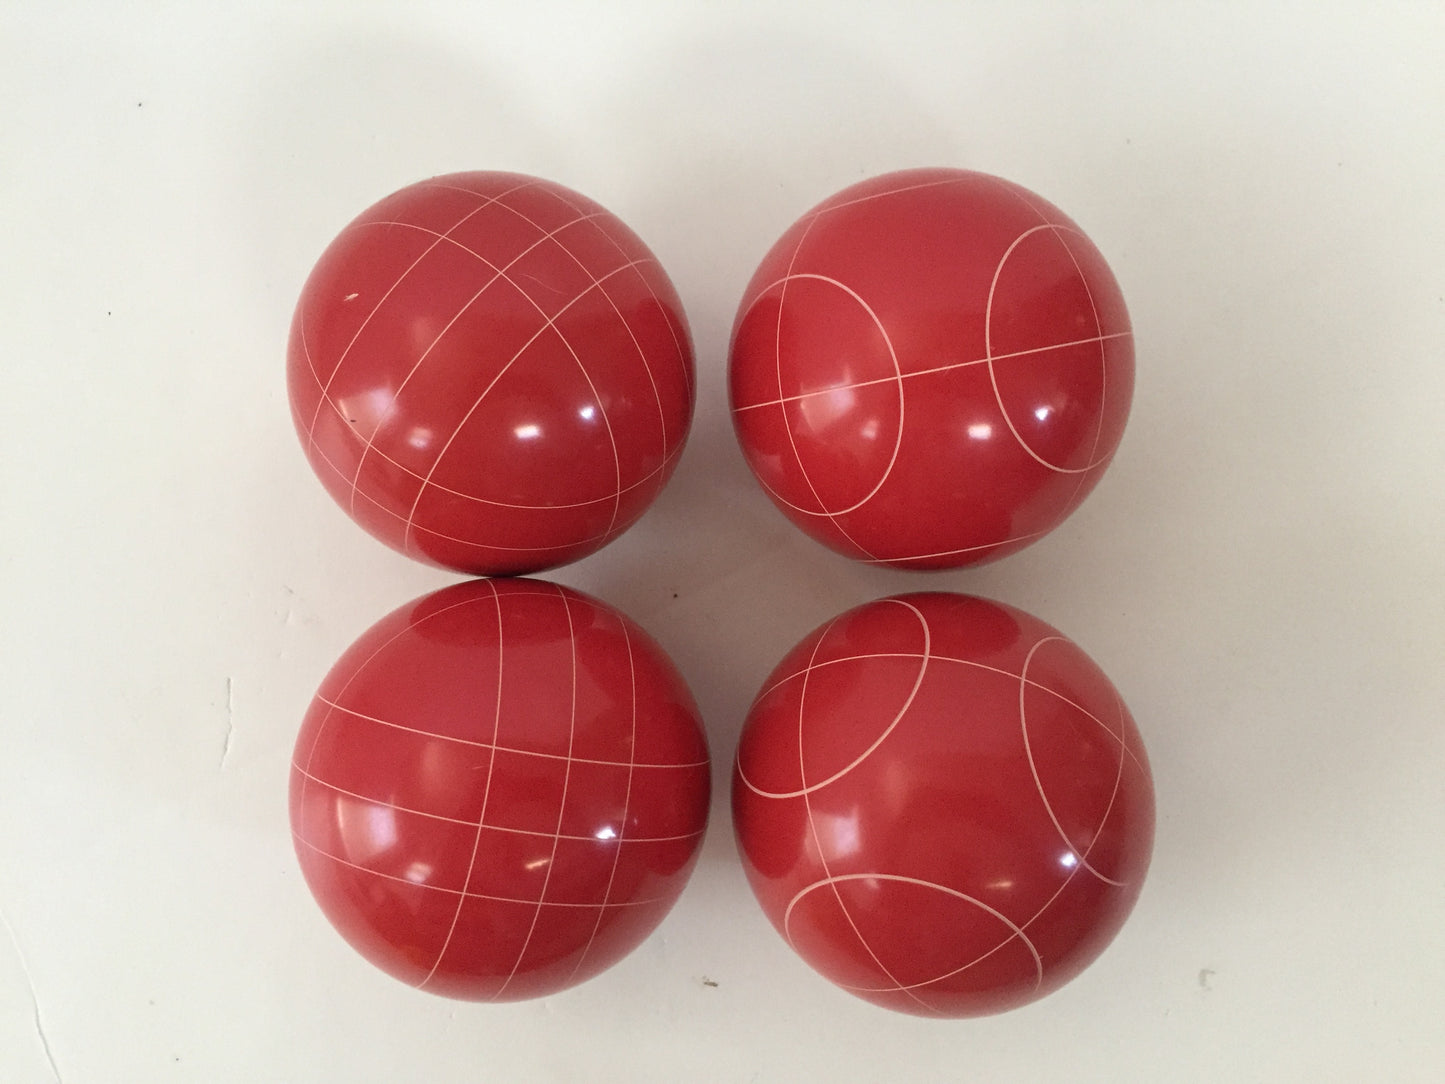 107mm 4 pack Bocce Balls  - Red with 2 different scoring patterns